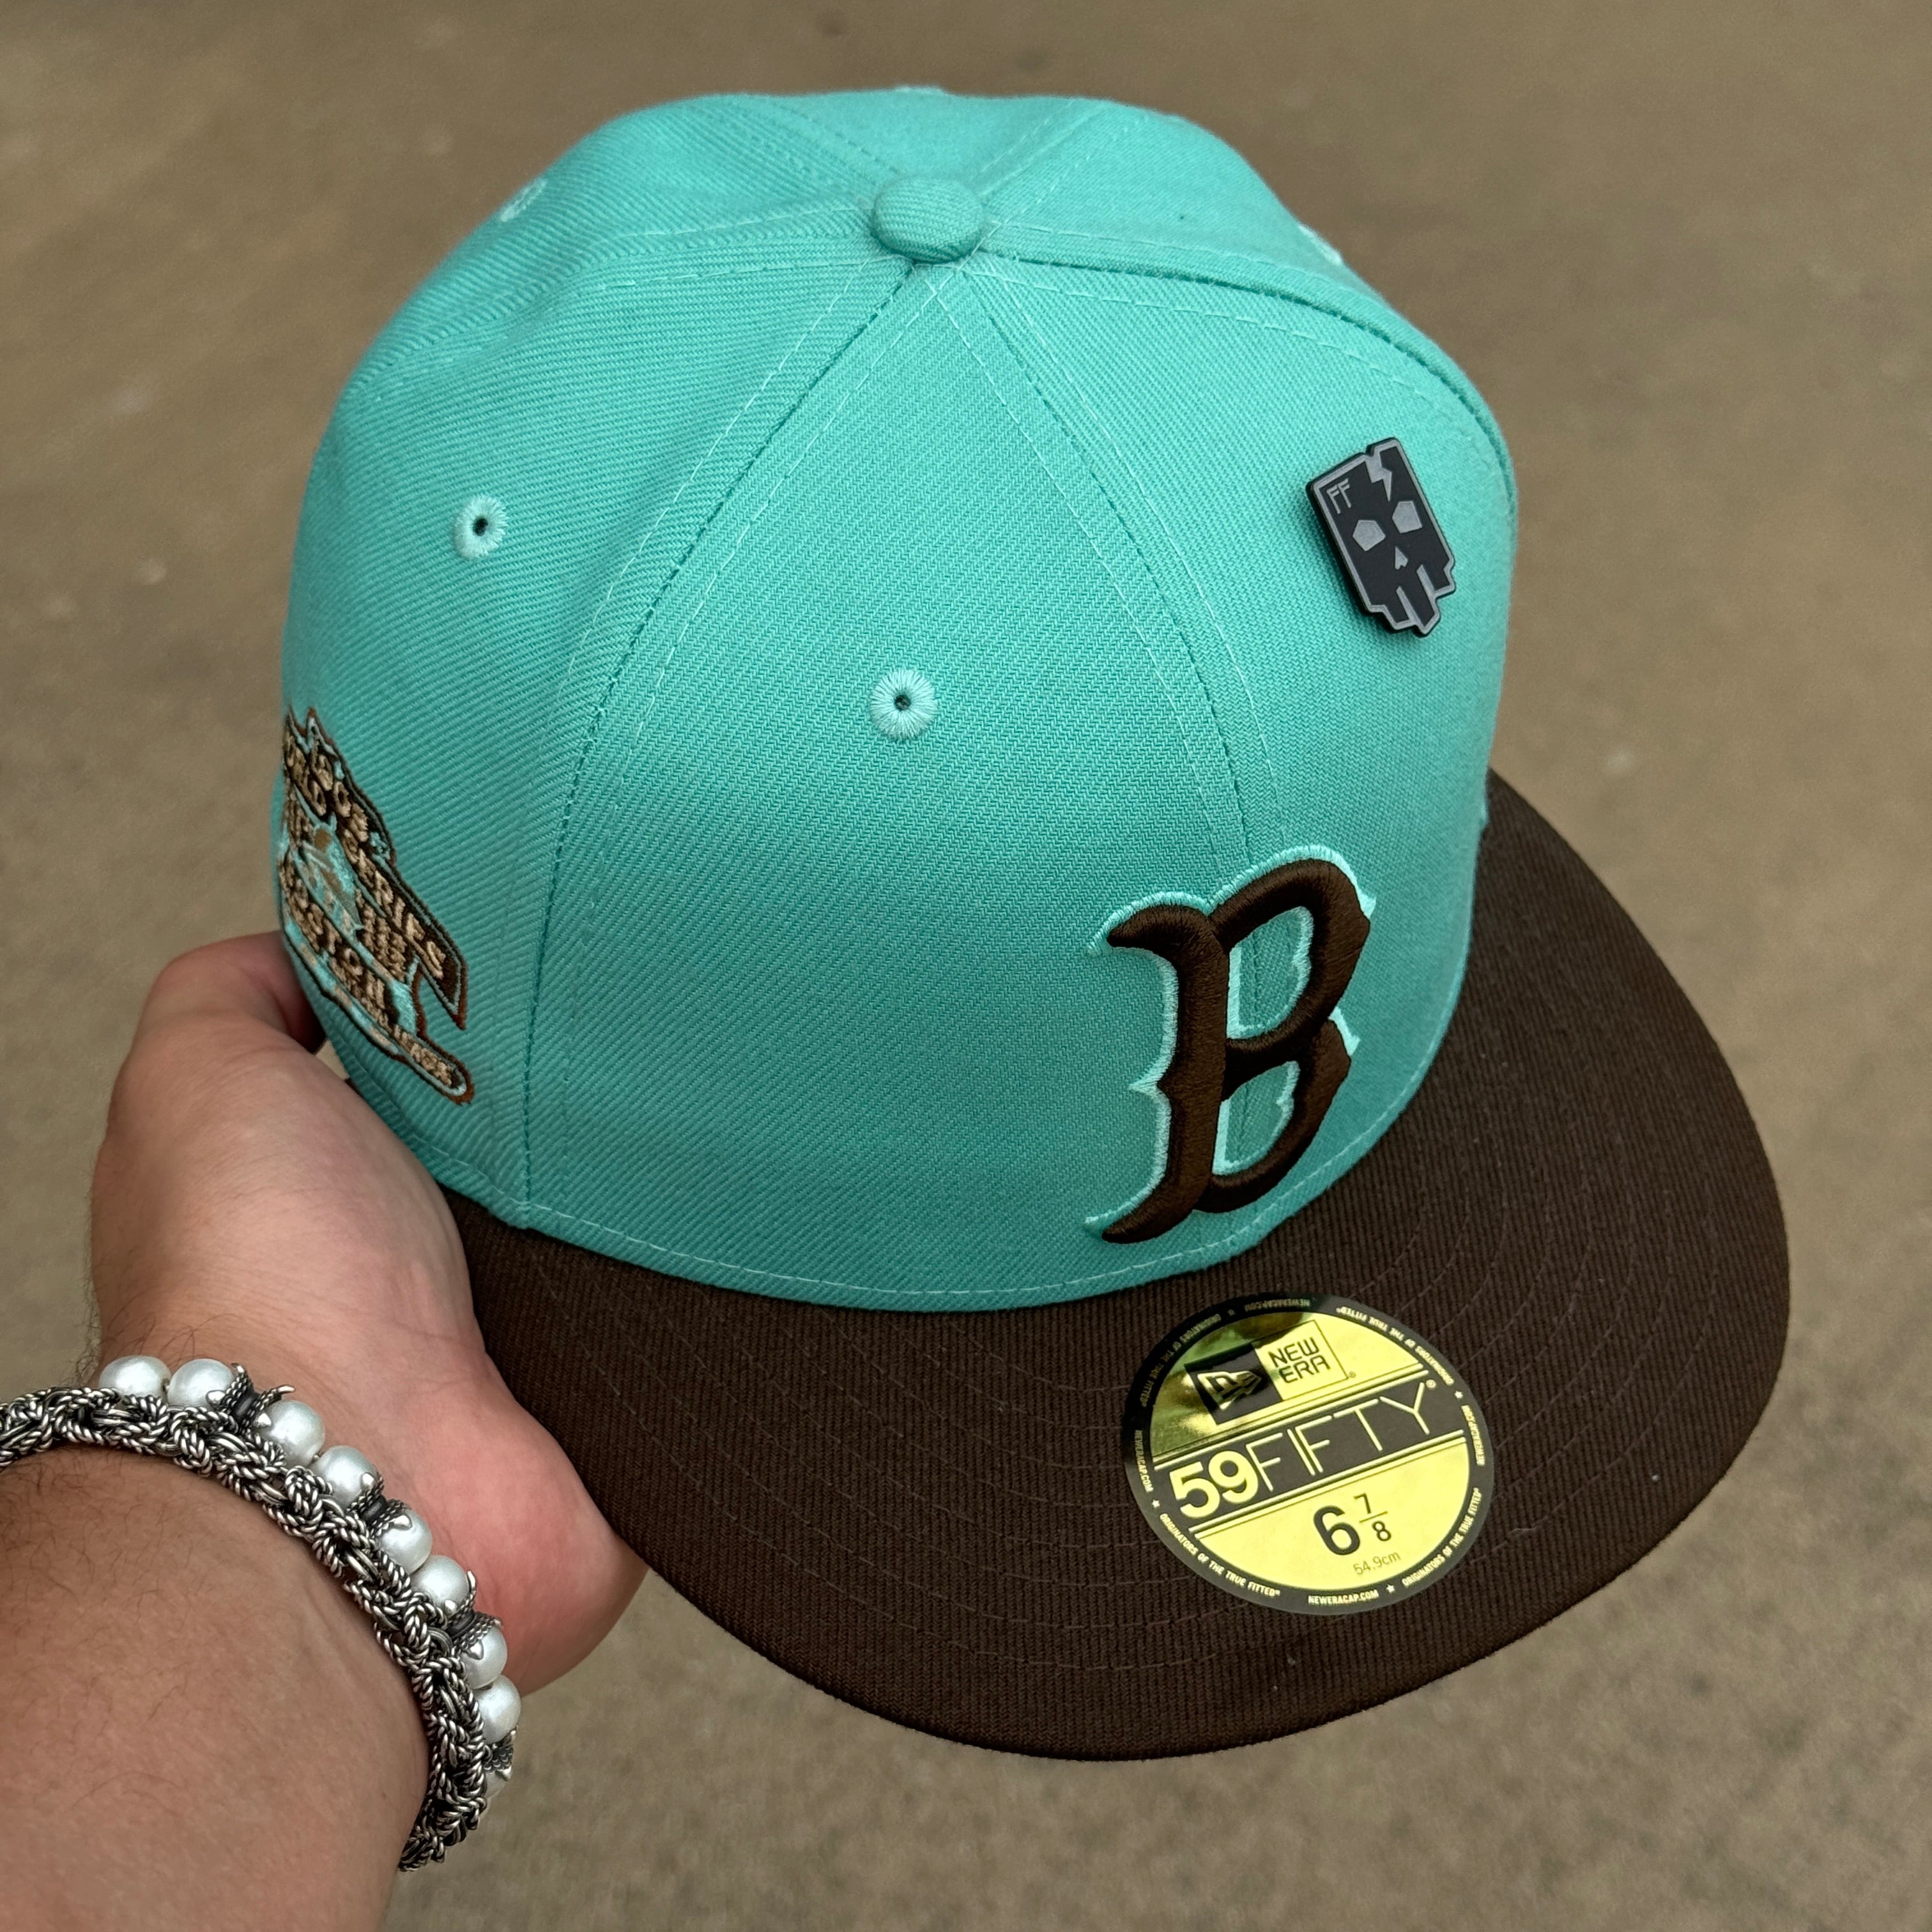 NEW 6 7/8 Tiffany Blue Boston Red Sox 1903 World Series 59FIFTY New Era Fitted Hat